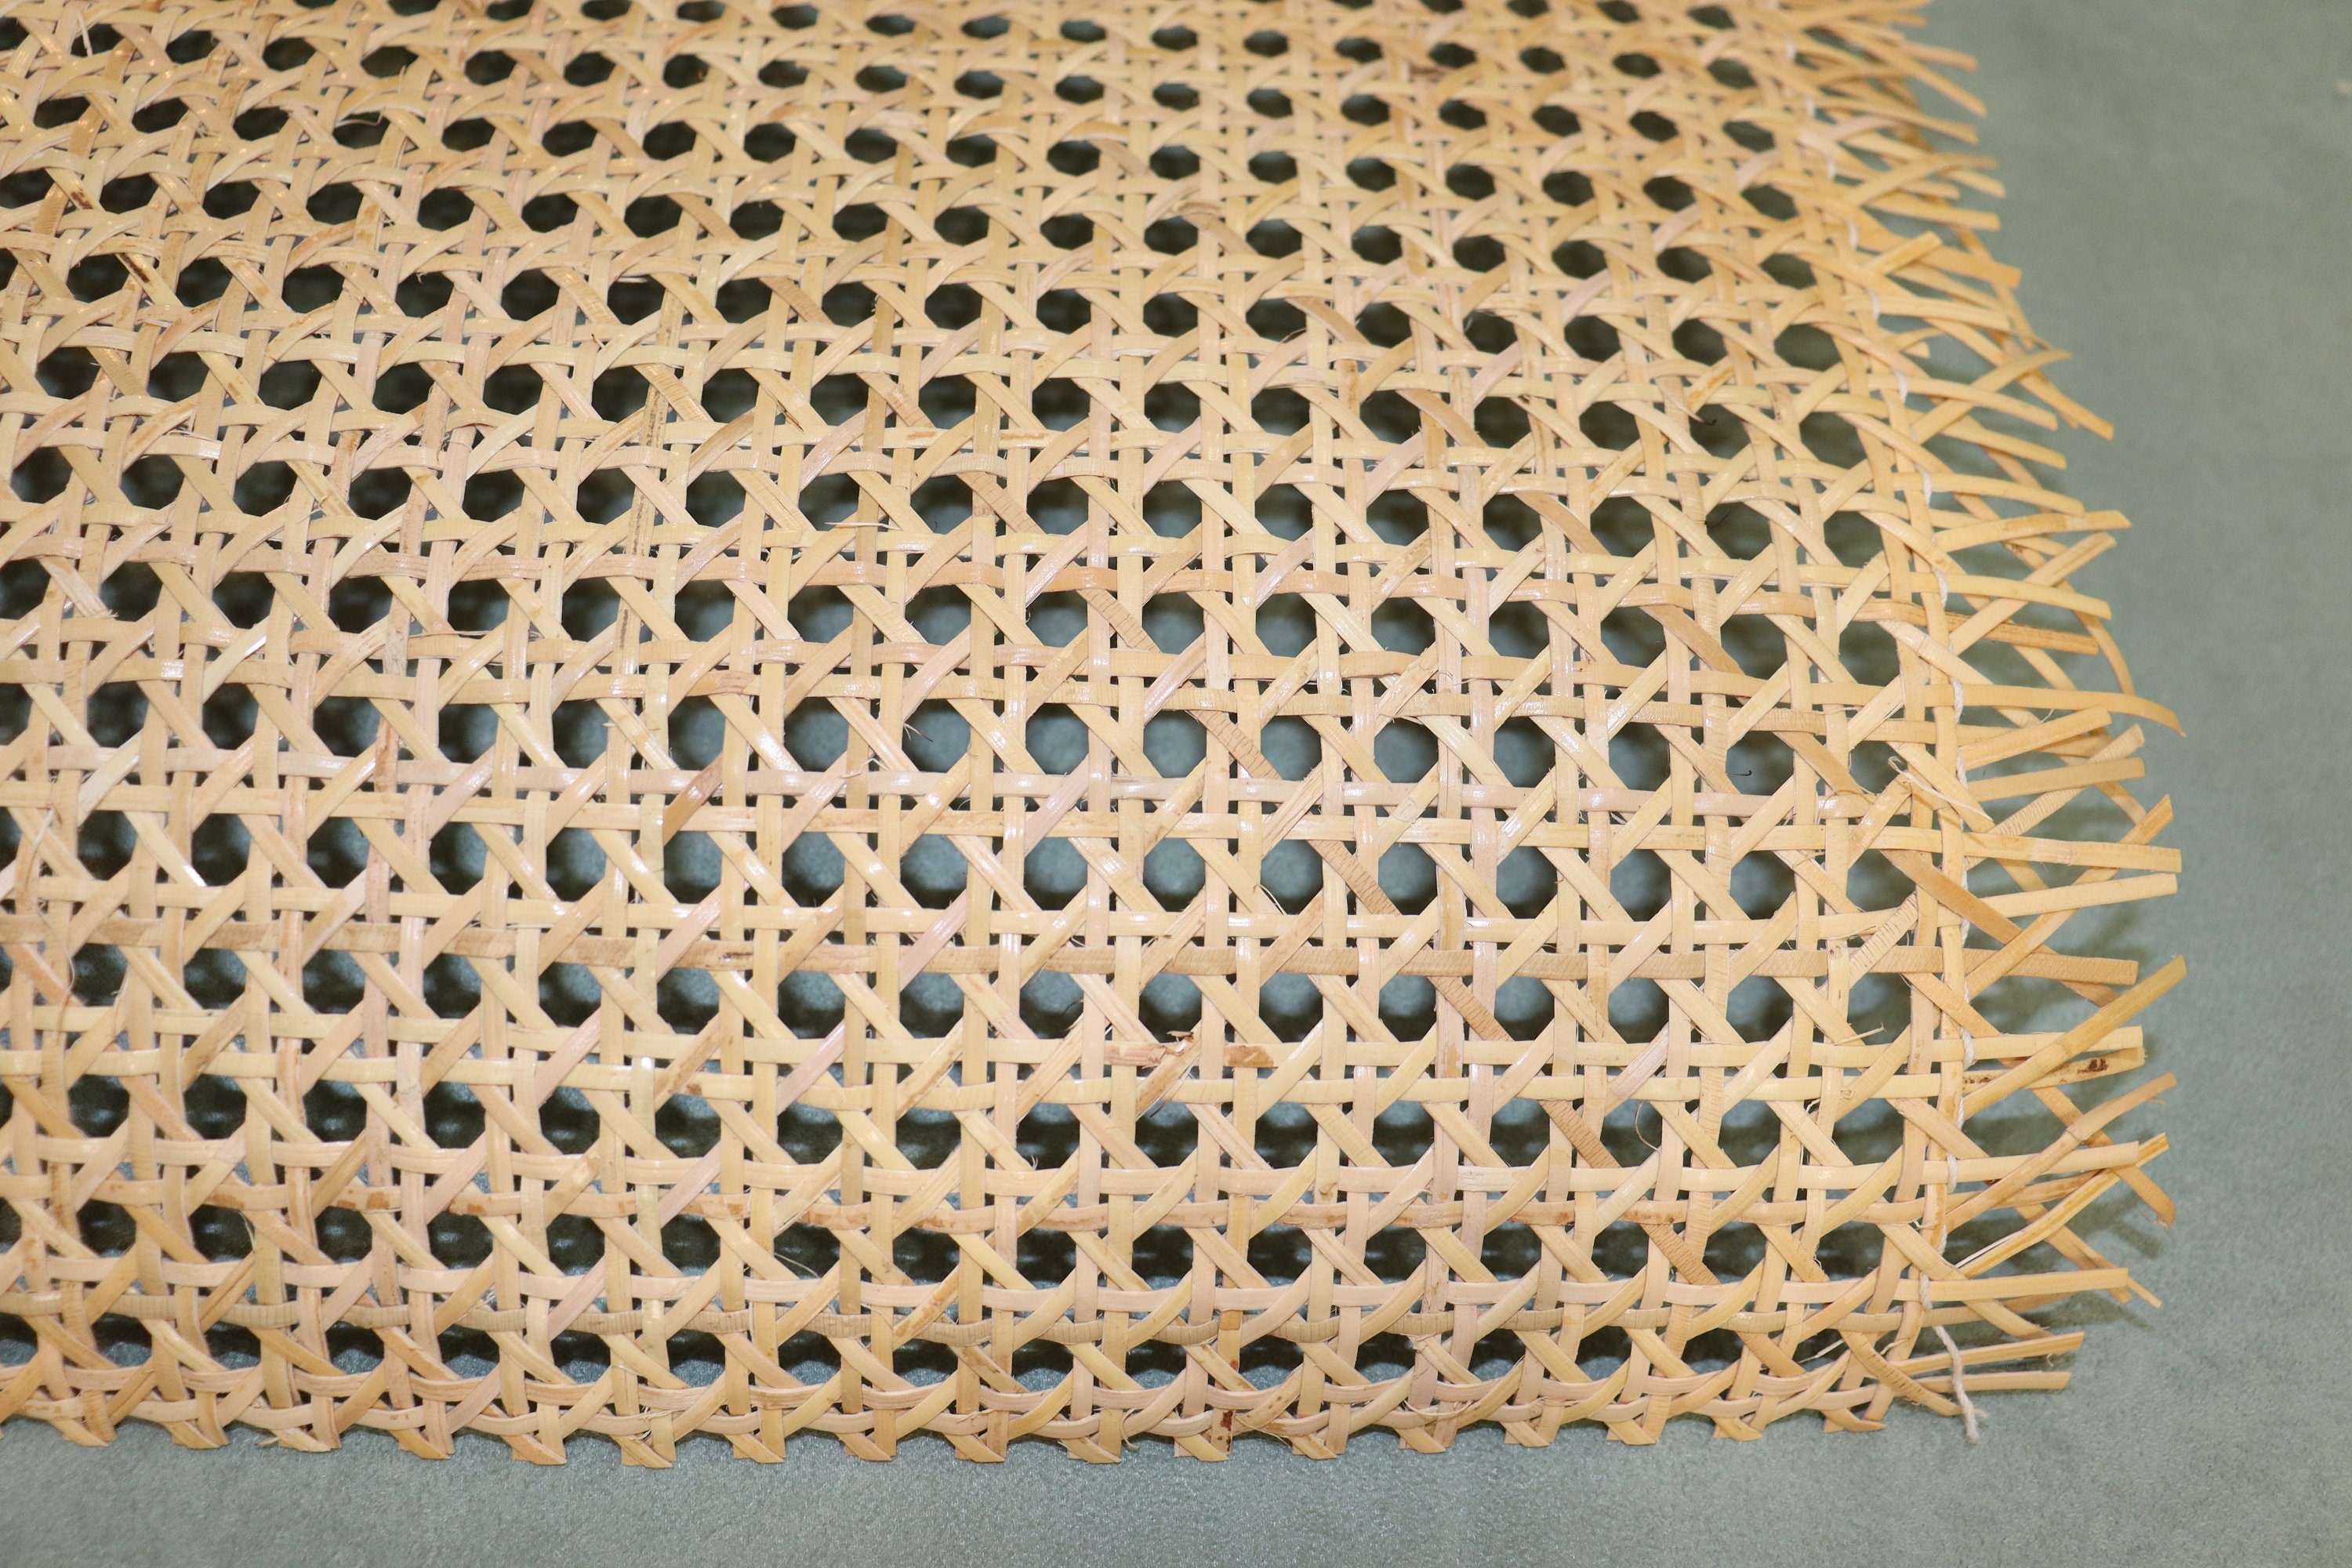 Discount Trends 18” Wide Natural Rattan Webbing Roll for Caning Projects Pre - Woven Open Mesh for Caning Chair, Craft Cabinet and Furniture - Natural Rattan